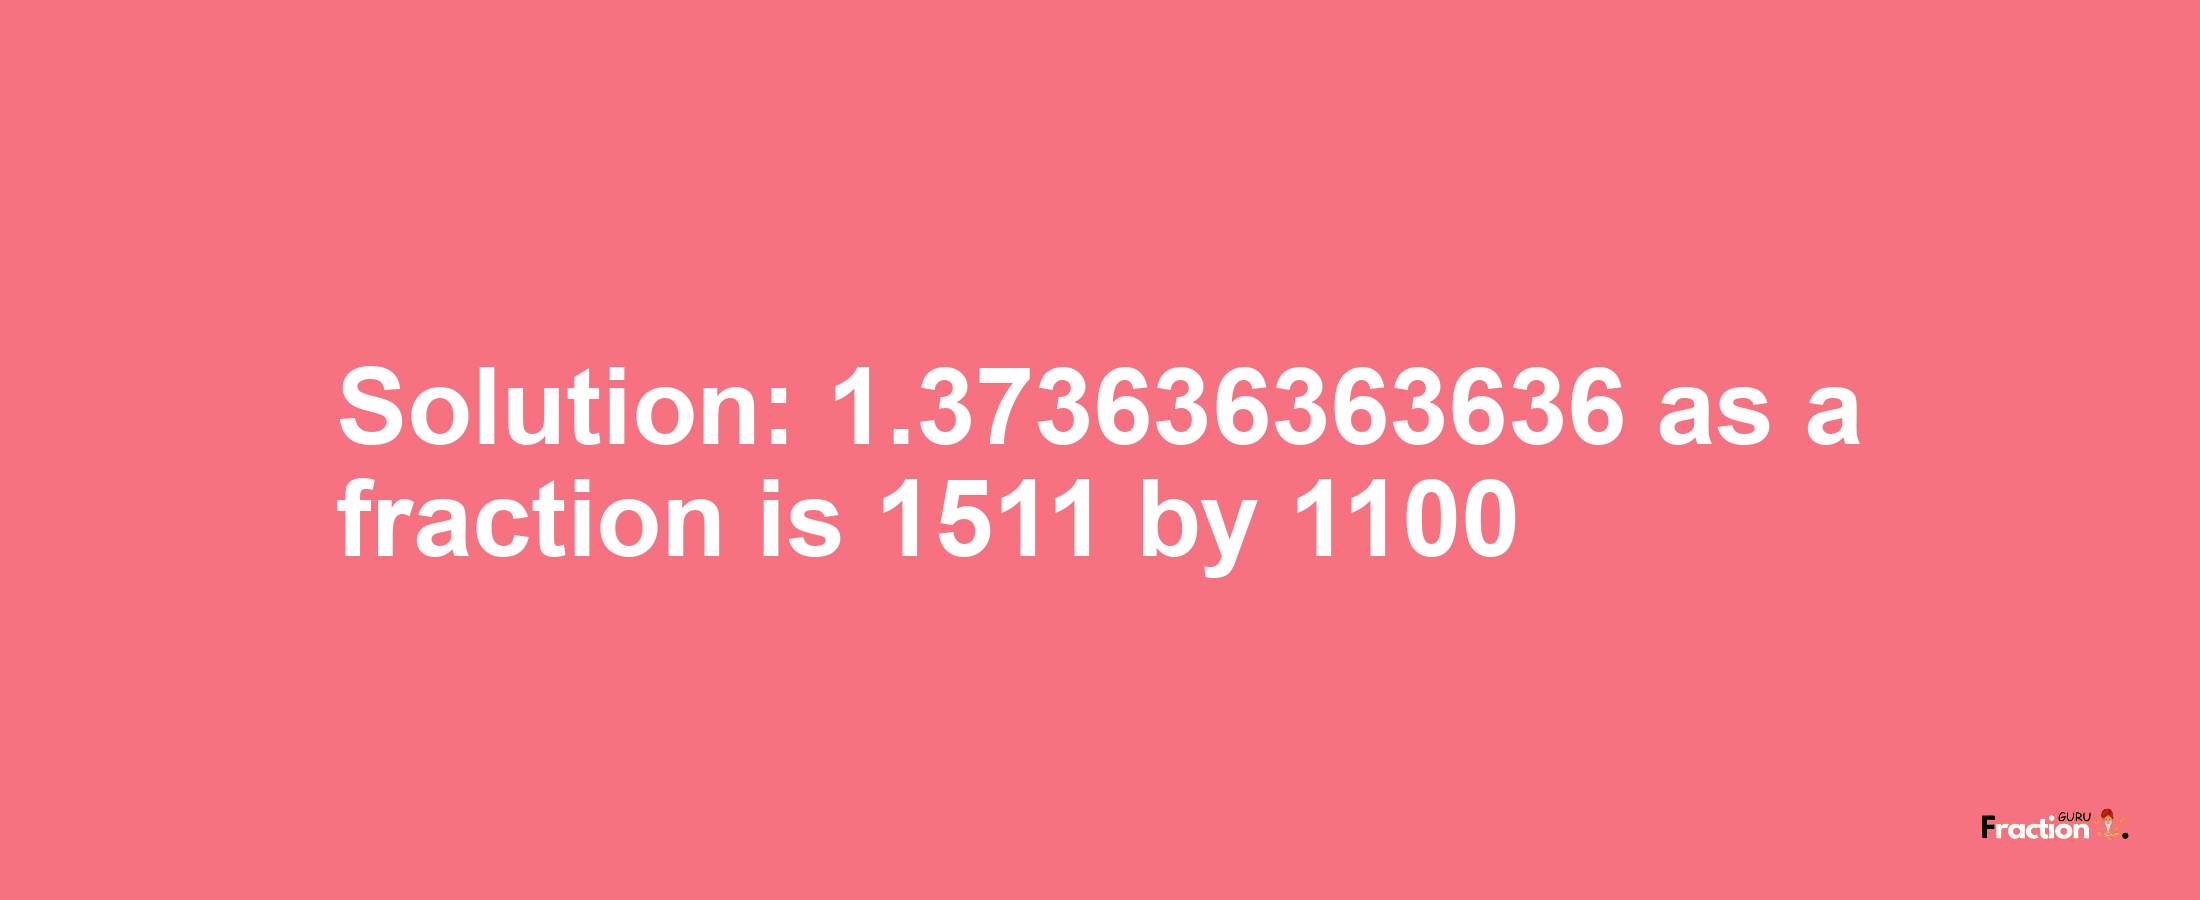 Solution:1.373636363636 as a fraction is 1511/1100